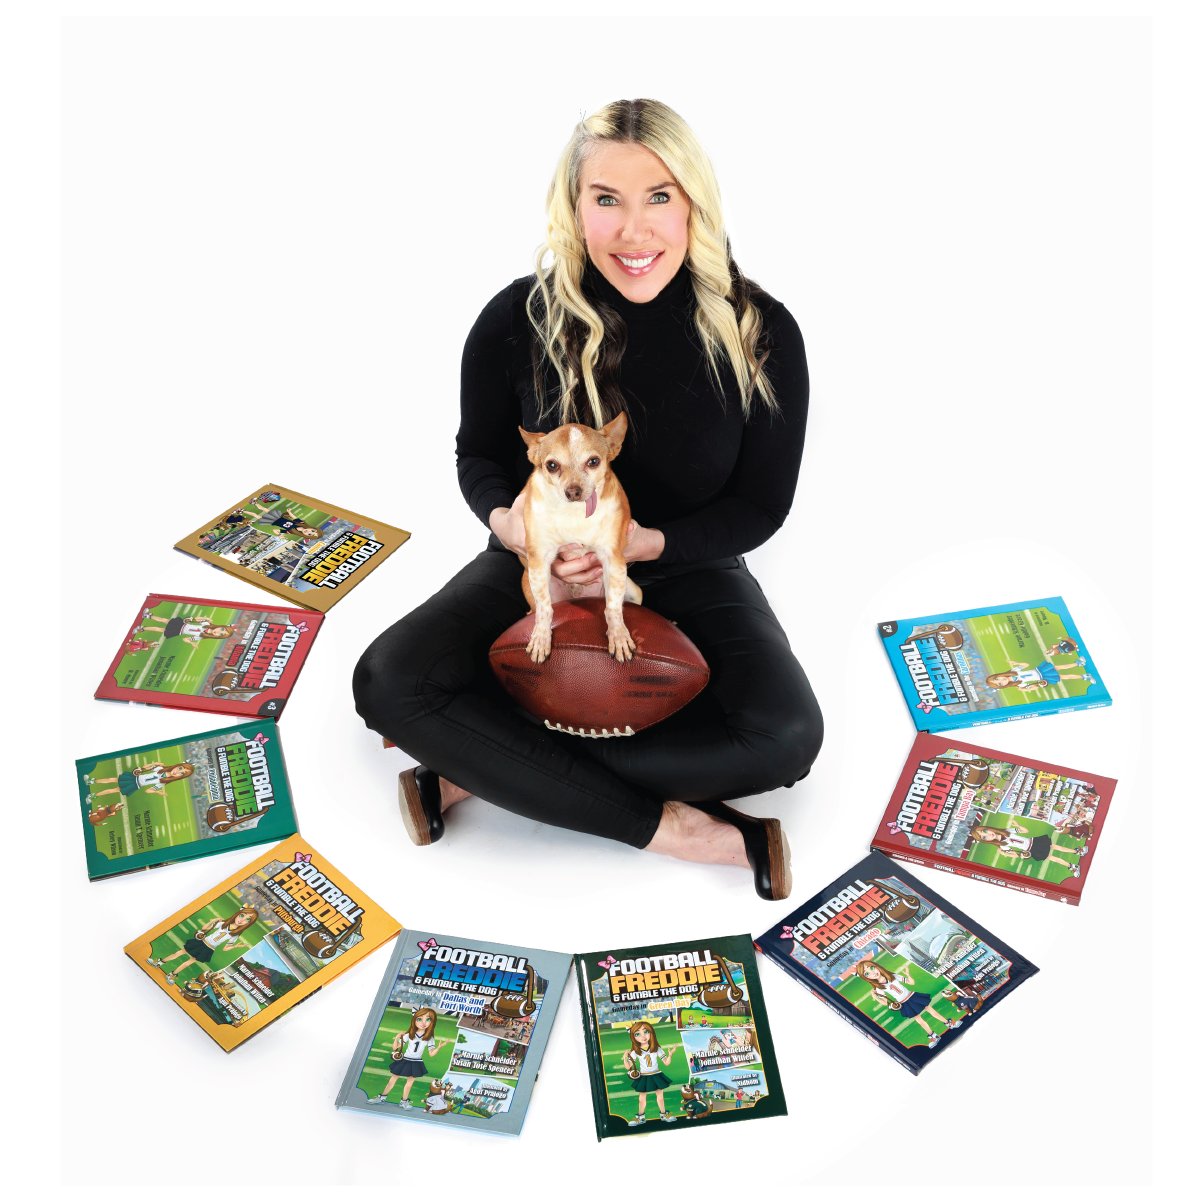 🚨 NEWS 🚨 The Hall of Fame has partnered with author @MarnieSchneidr, CEO of Gameday and author of the book series “Gameday in the USA,” to produce a children's book called “Football Freddie & Fumble the Dog, Gameday in Canton.” Full Story: profootballhof.me/Gameday